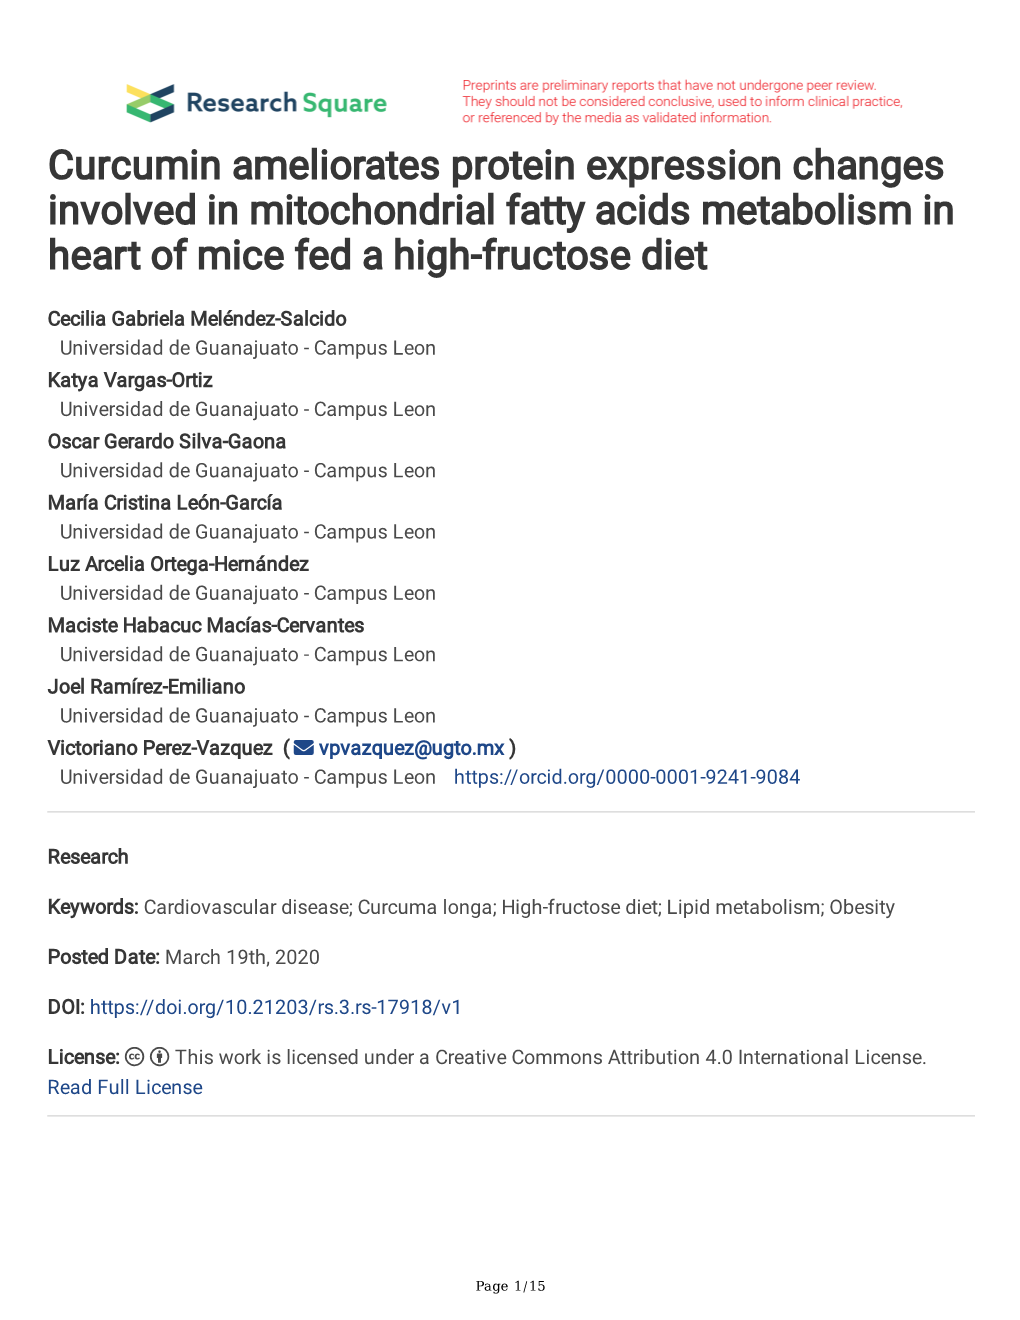 Curcumin Ameliorates Protein Expression Changes Involved in Mitochondrial Fatty Acids Metabolism in Heart of Mice Fed a High-Fructose Diet